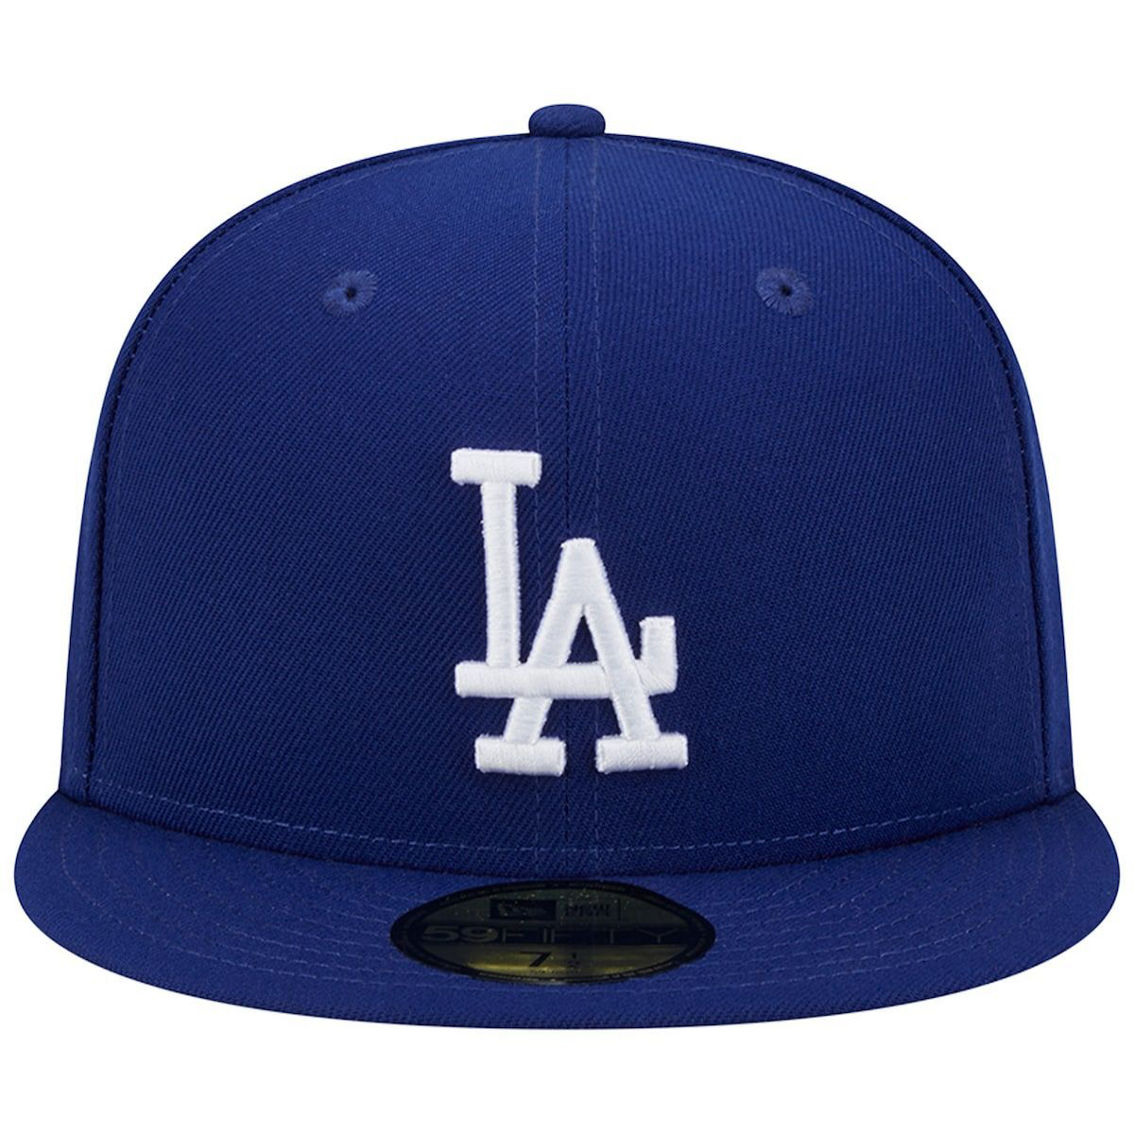 New Era Men's Royal Los Angeles Dodgers 2020 World Series Team Color 59FIFTY Fitted Hat - Image 3 of 4